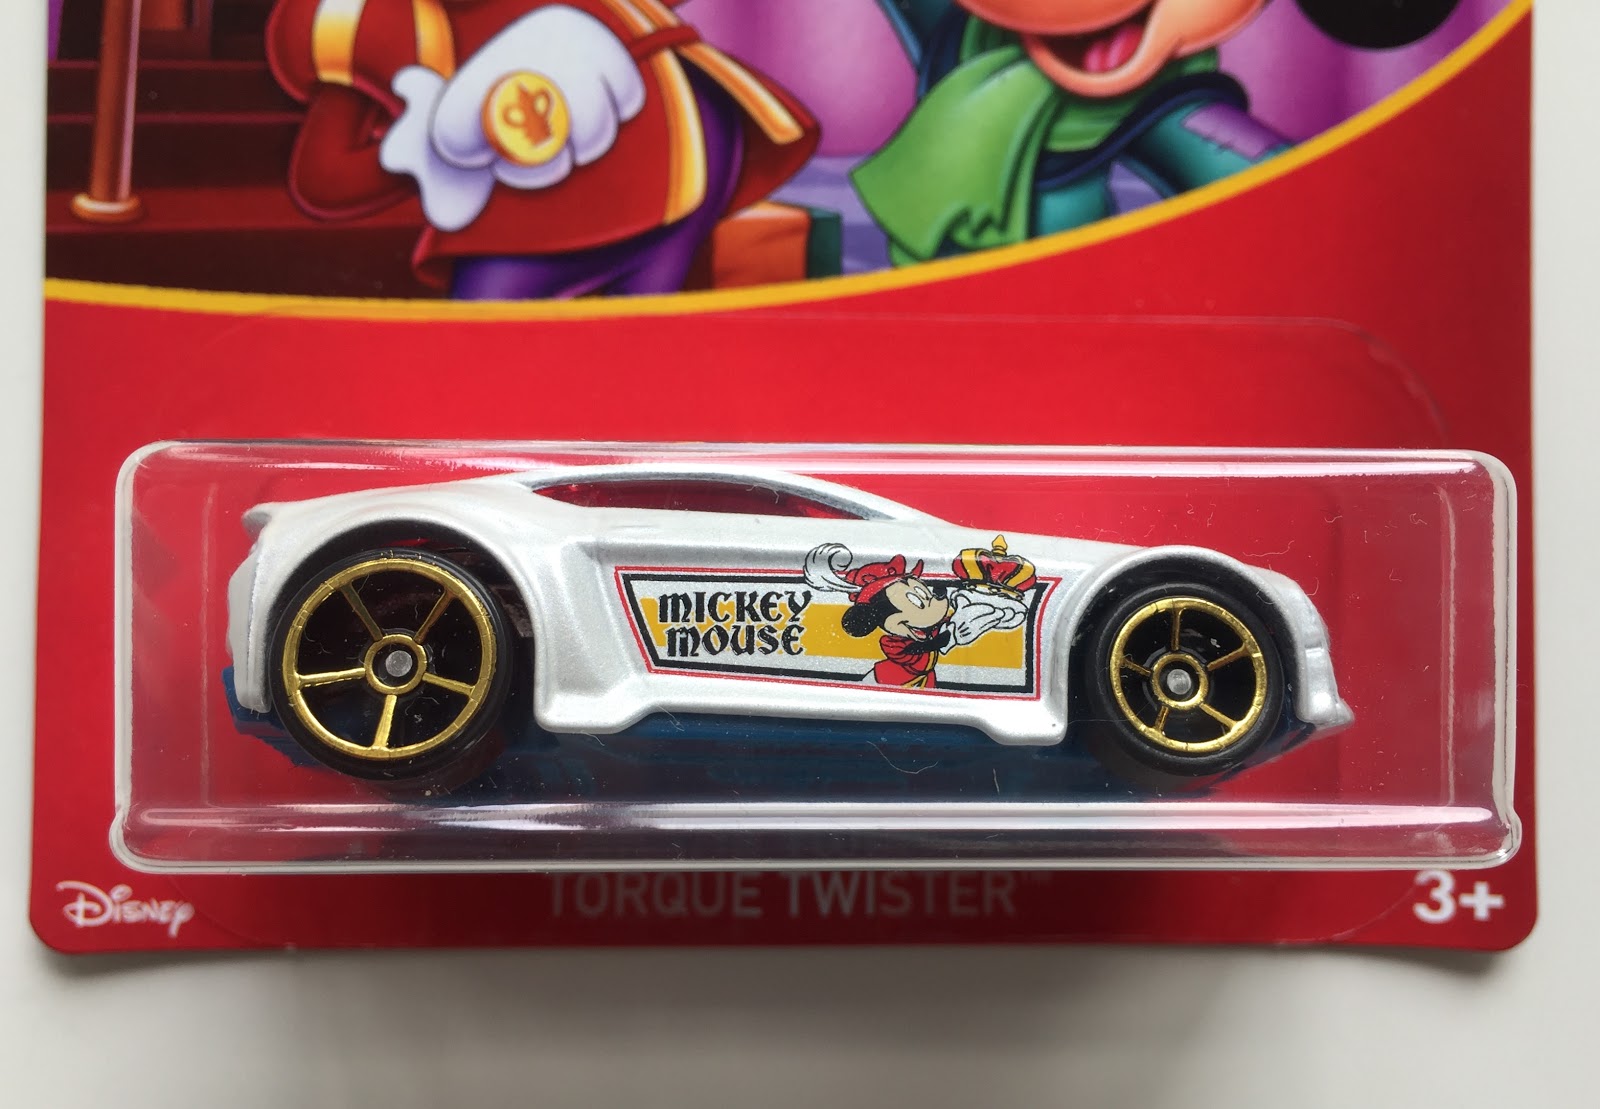 8 Prince and The Pauper for sale online Hot Wheels Mickey Mouse 2018 Disney Torque Twister 6